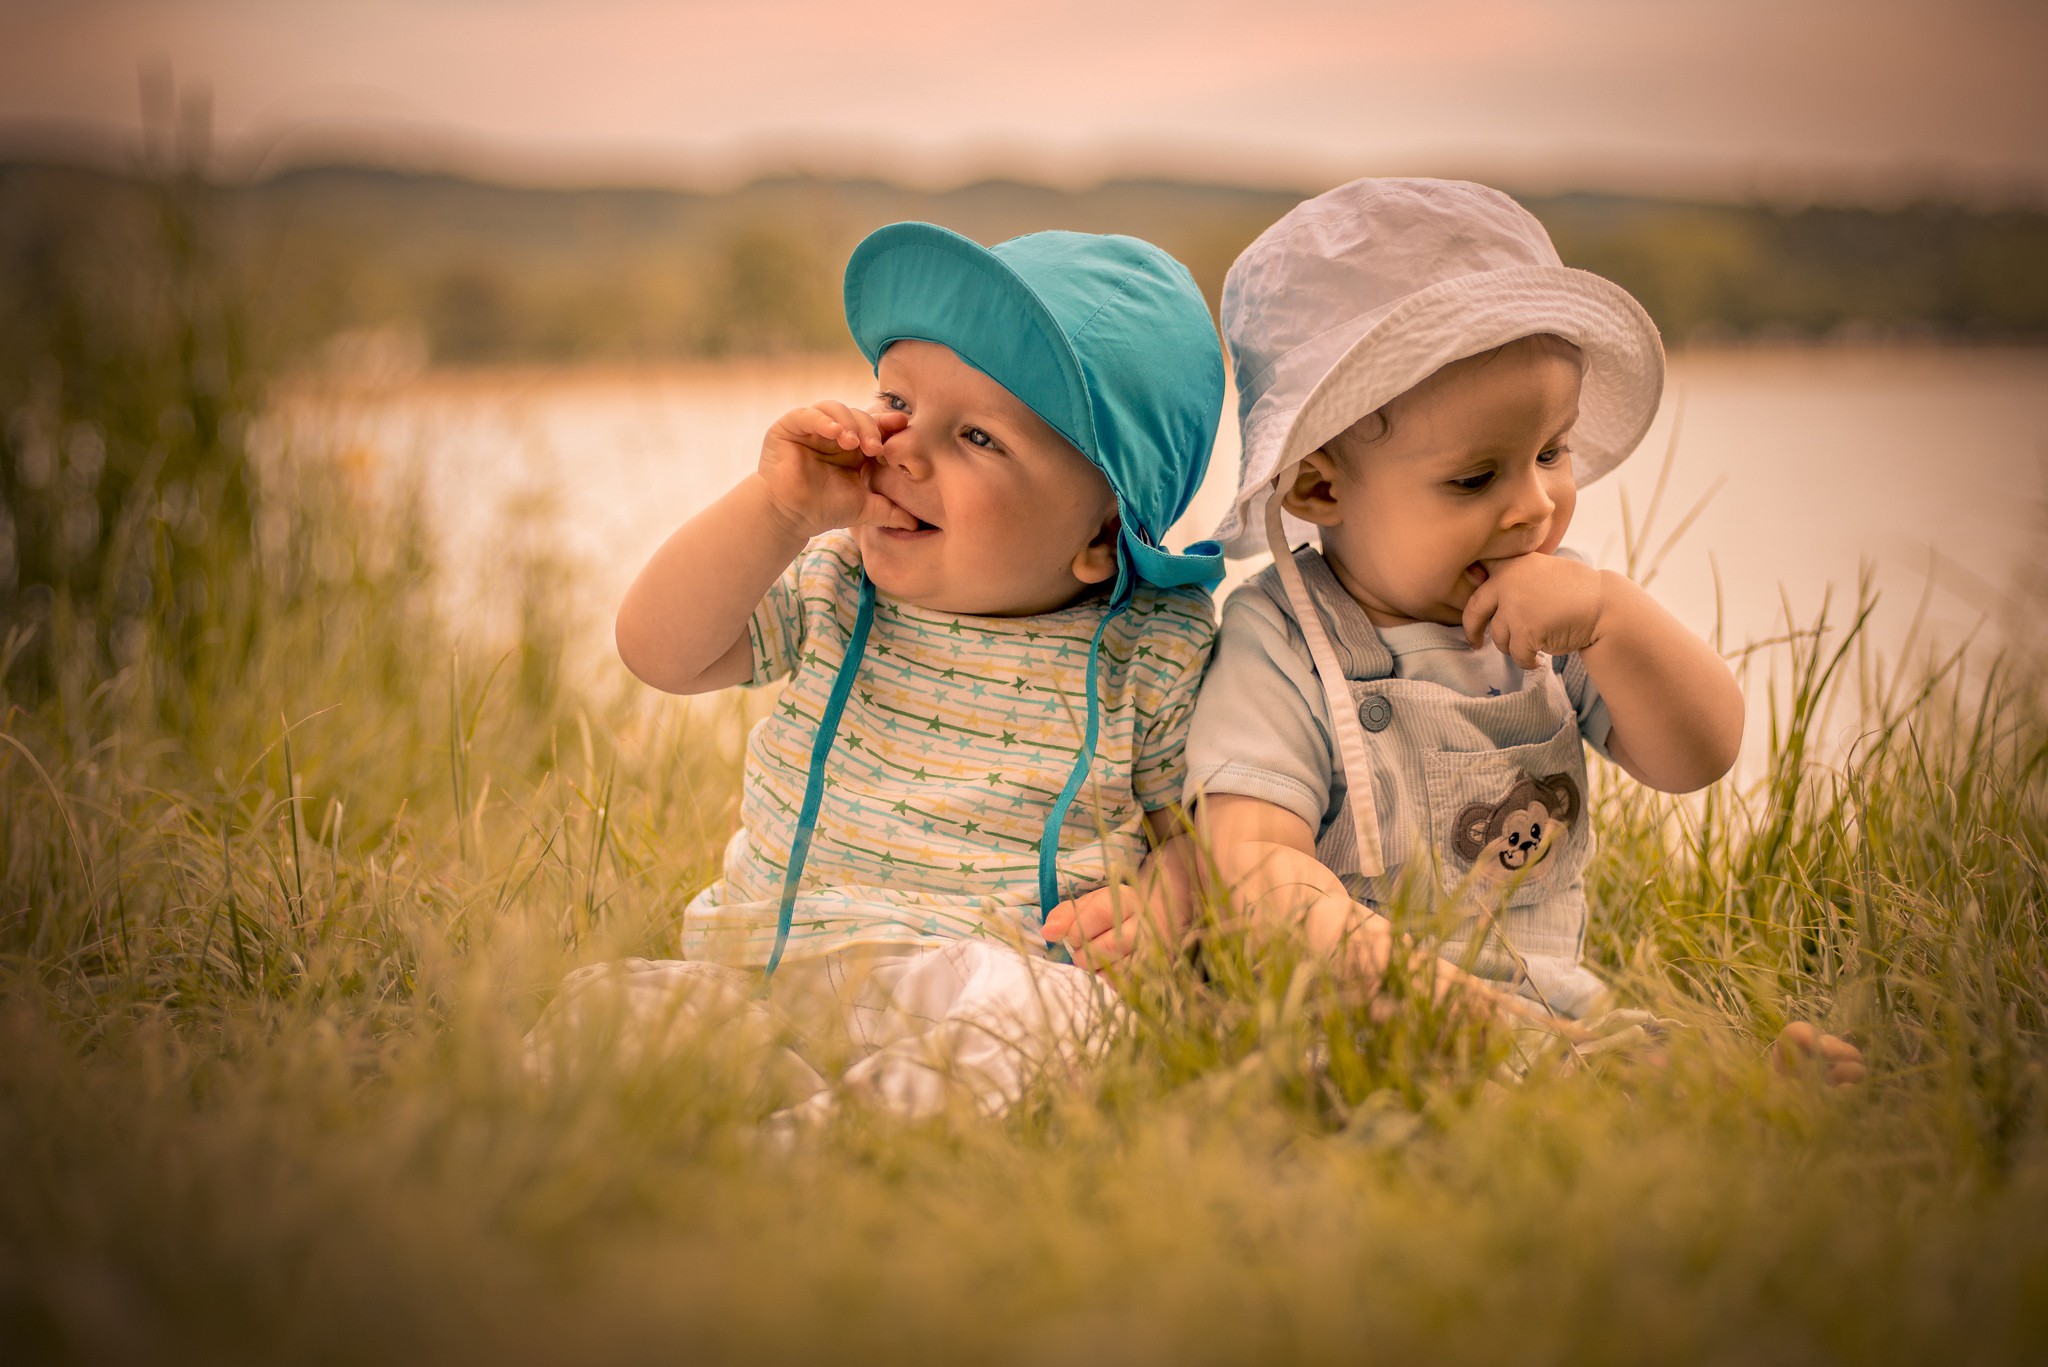 small kids wallpaper,people in nature,child,photograph,toddler,grass